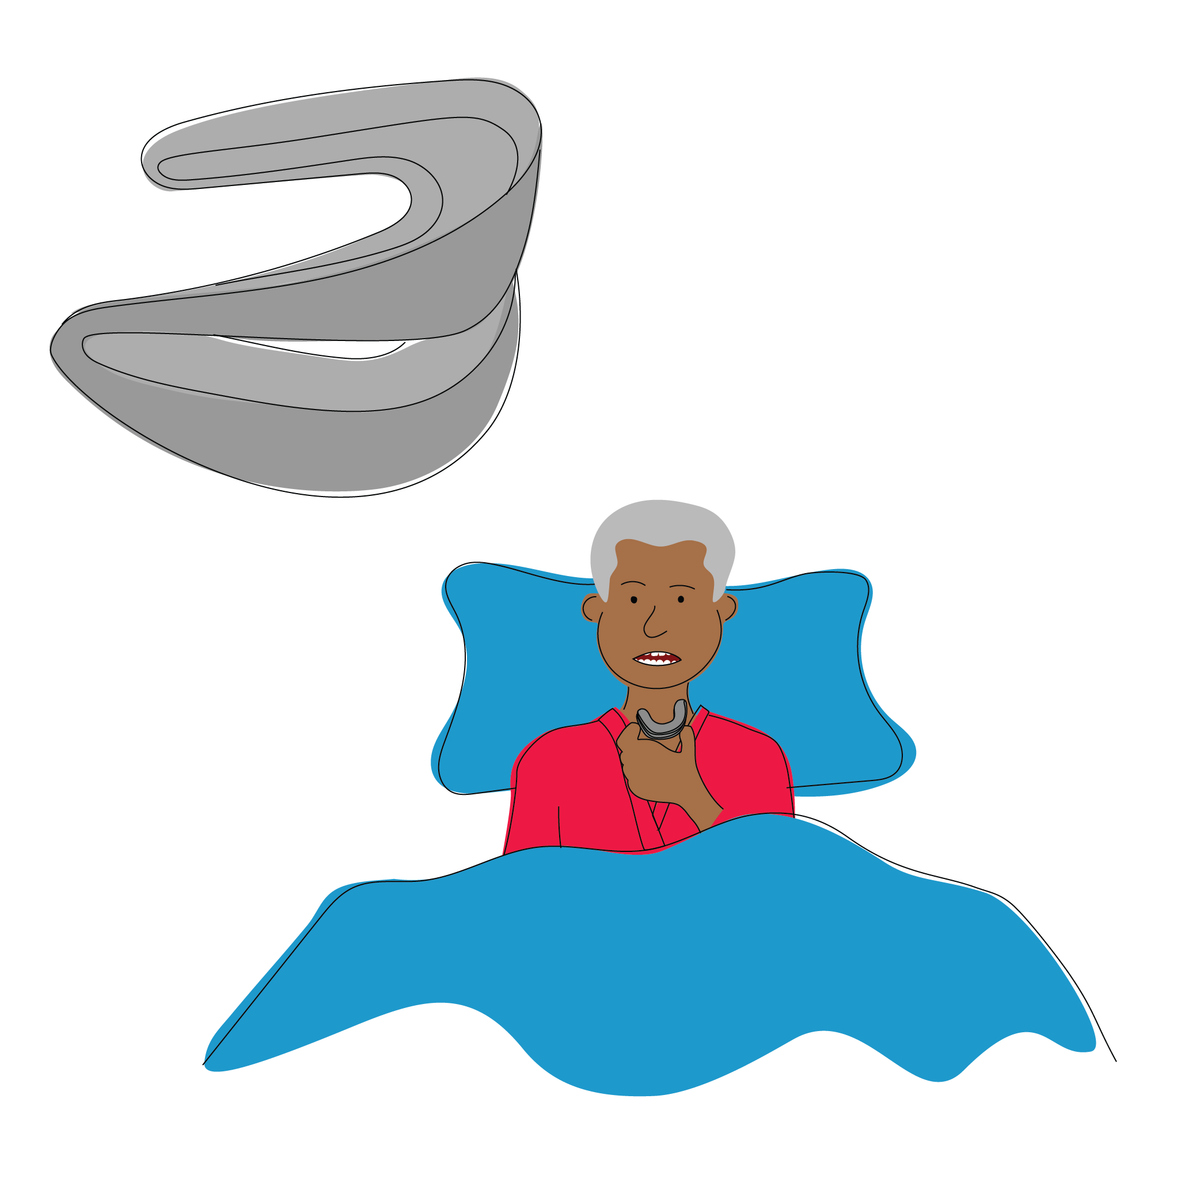 A graphic of a man in bed putting in a mouth gaurd